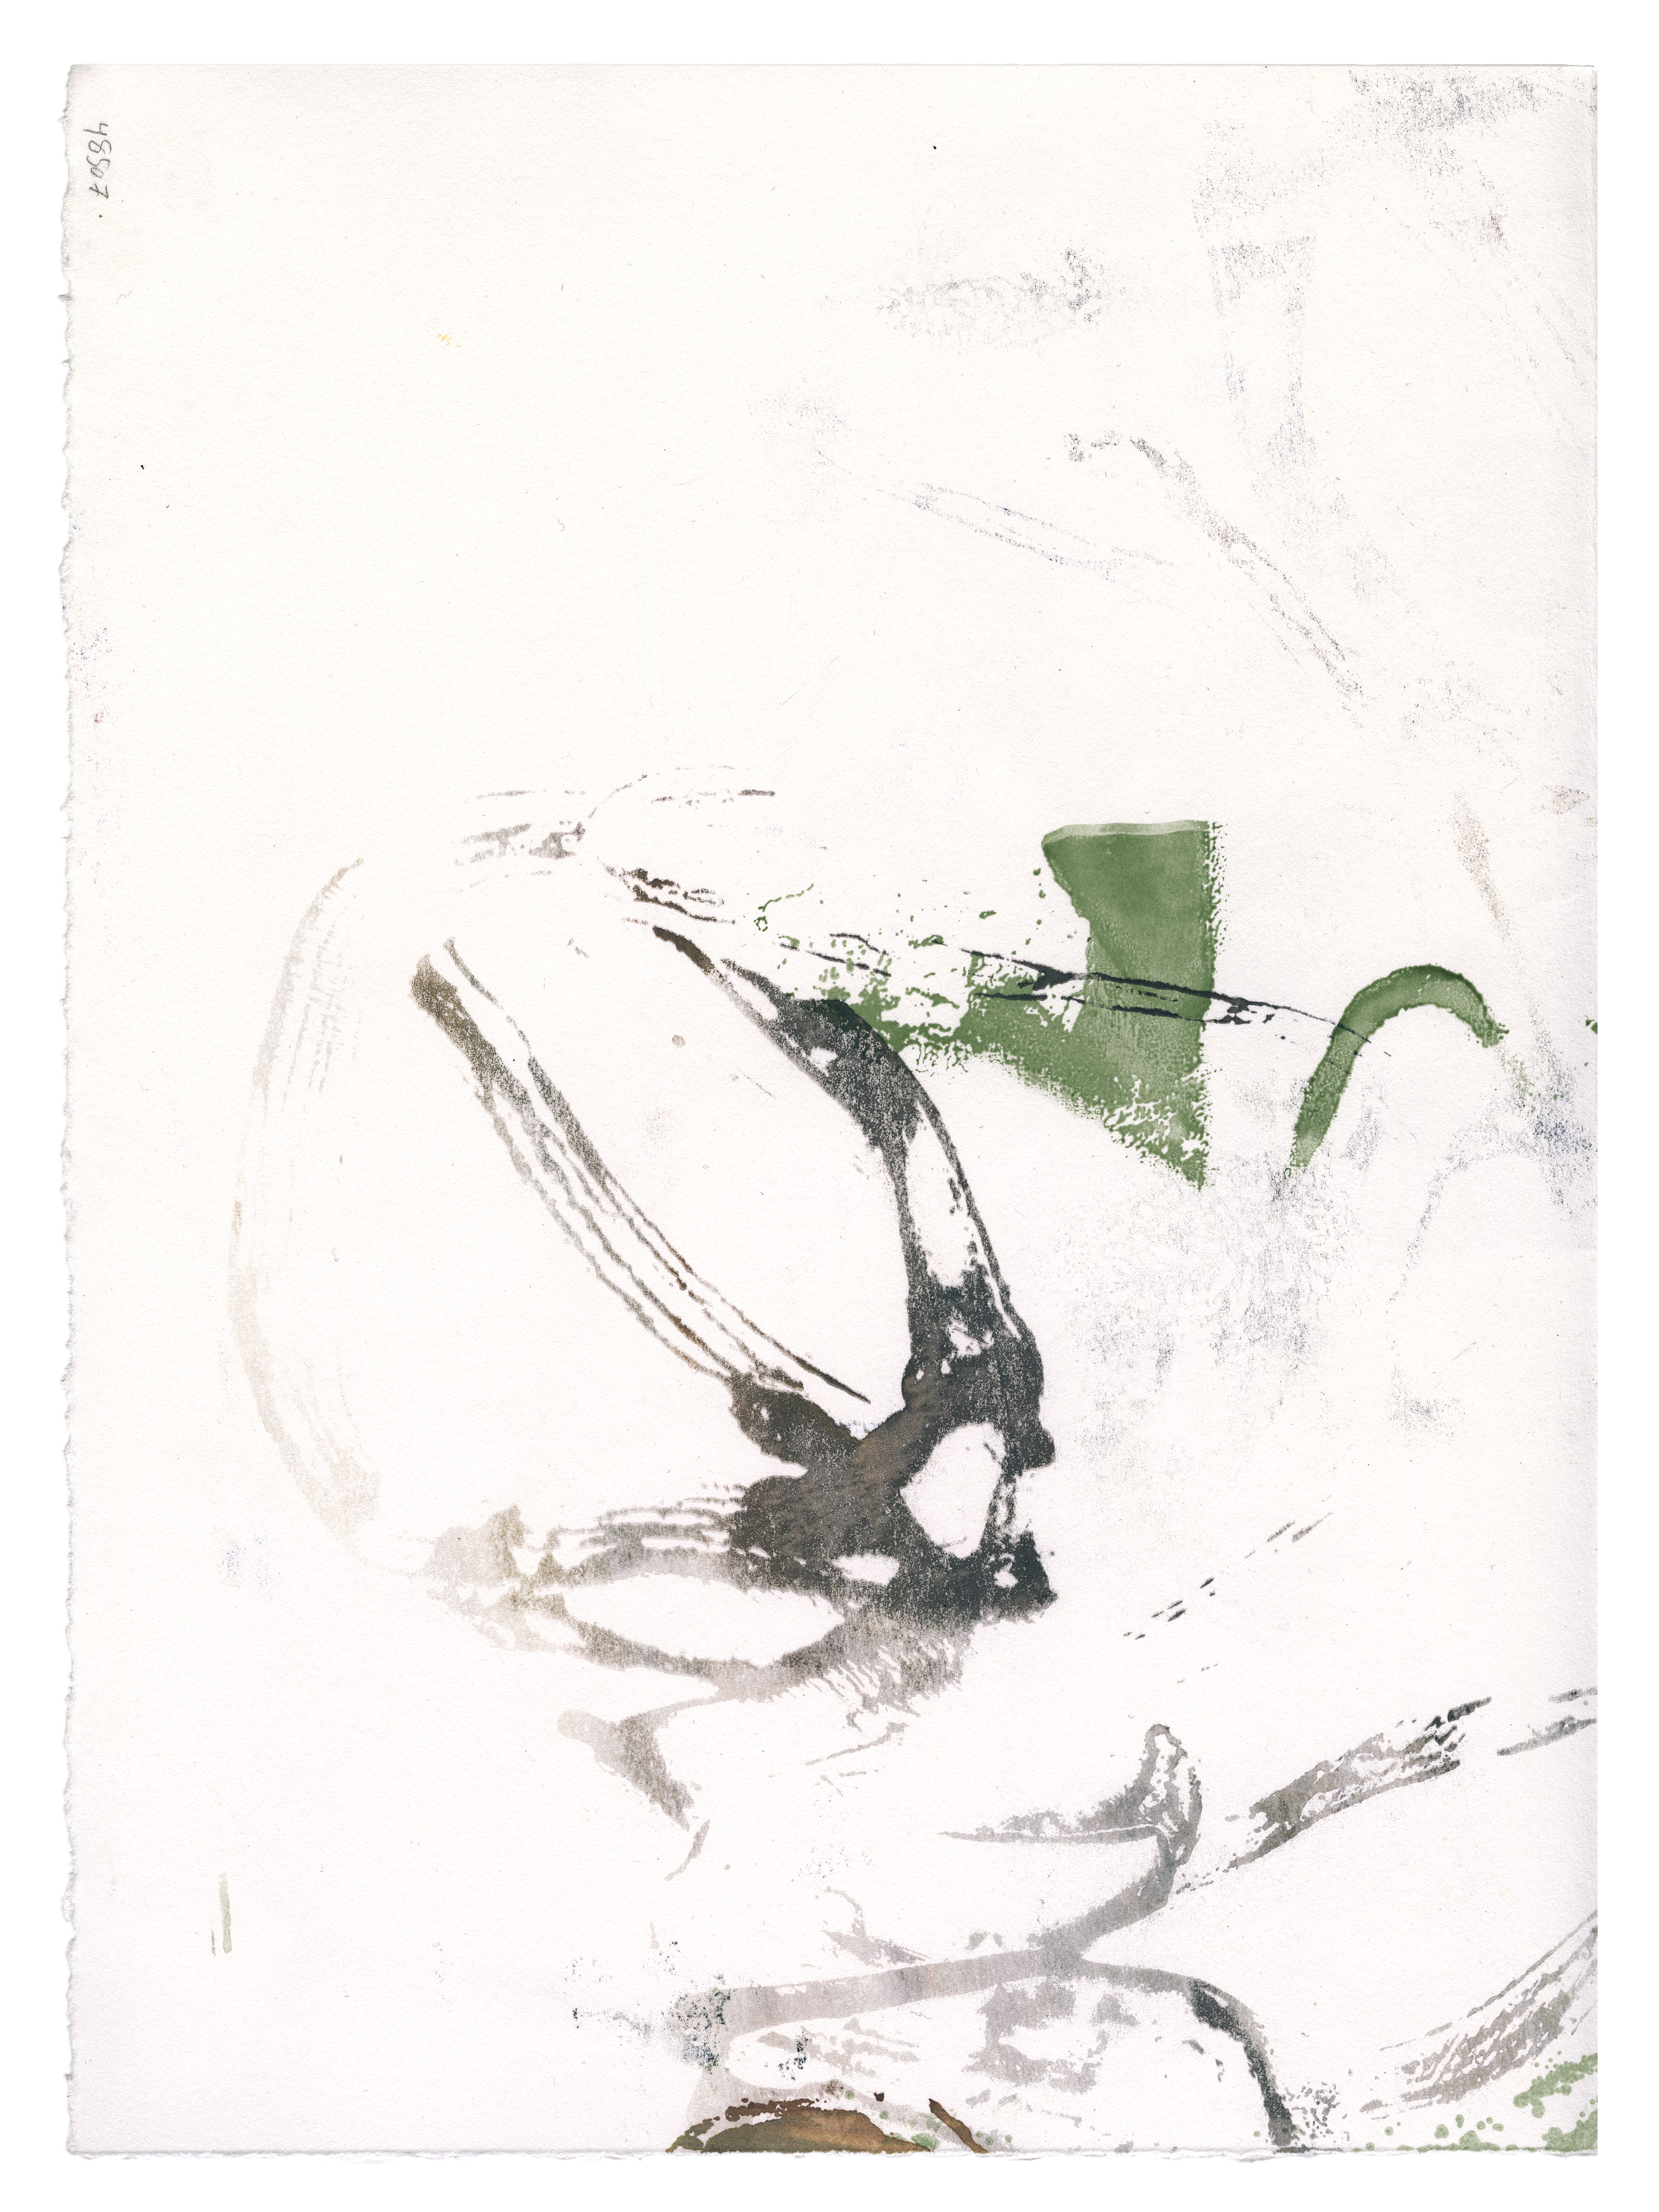 A photograph of a work on paper by artist Caroline Coolidge. The paper is white and is covered with a few organic, circular-looking abstract lines that are green and gray and layered.